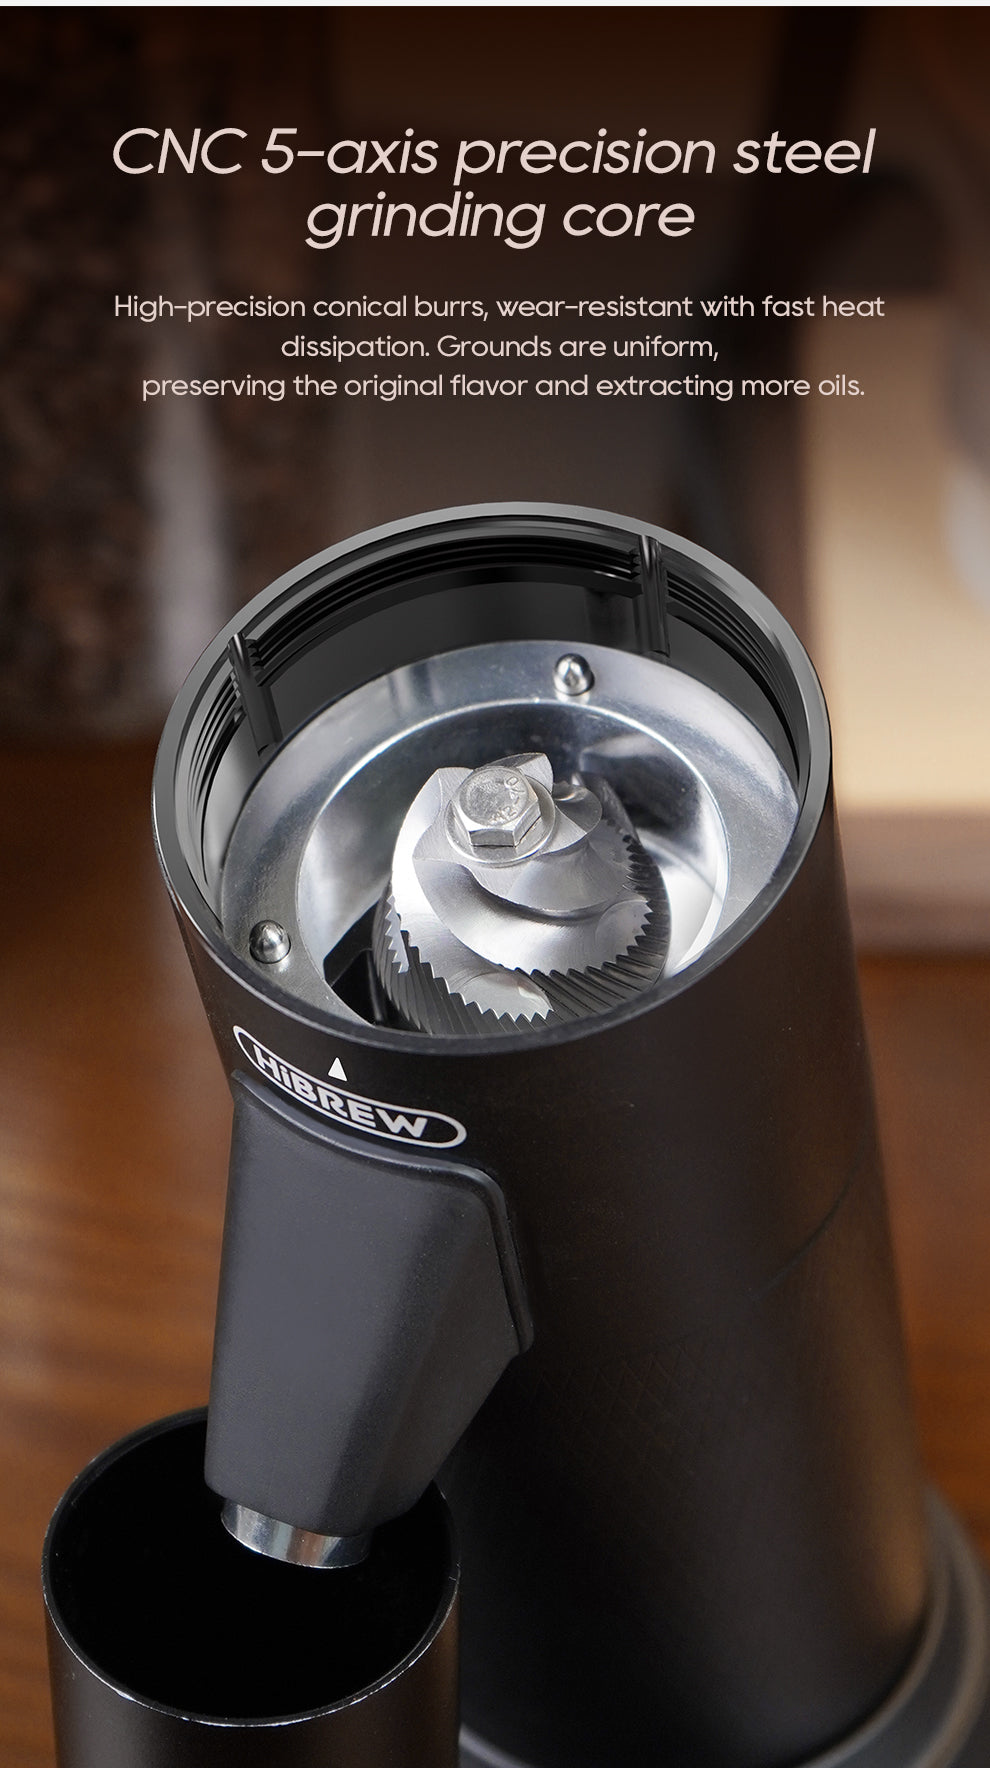 HiBREW G5 Electric Coffee Grinder with 99.8% Powder Rate by HiBREW